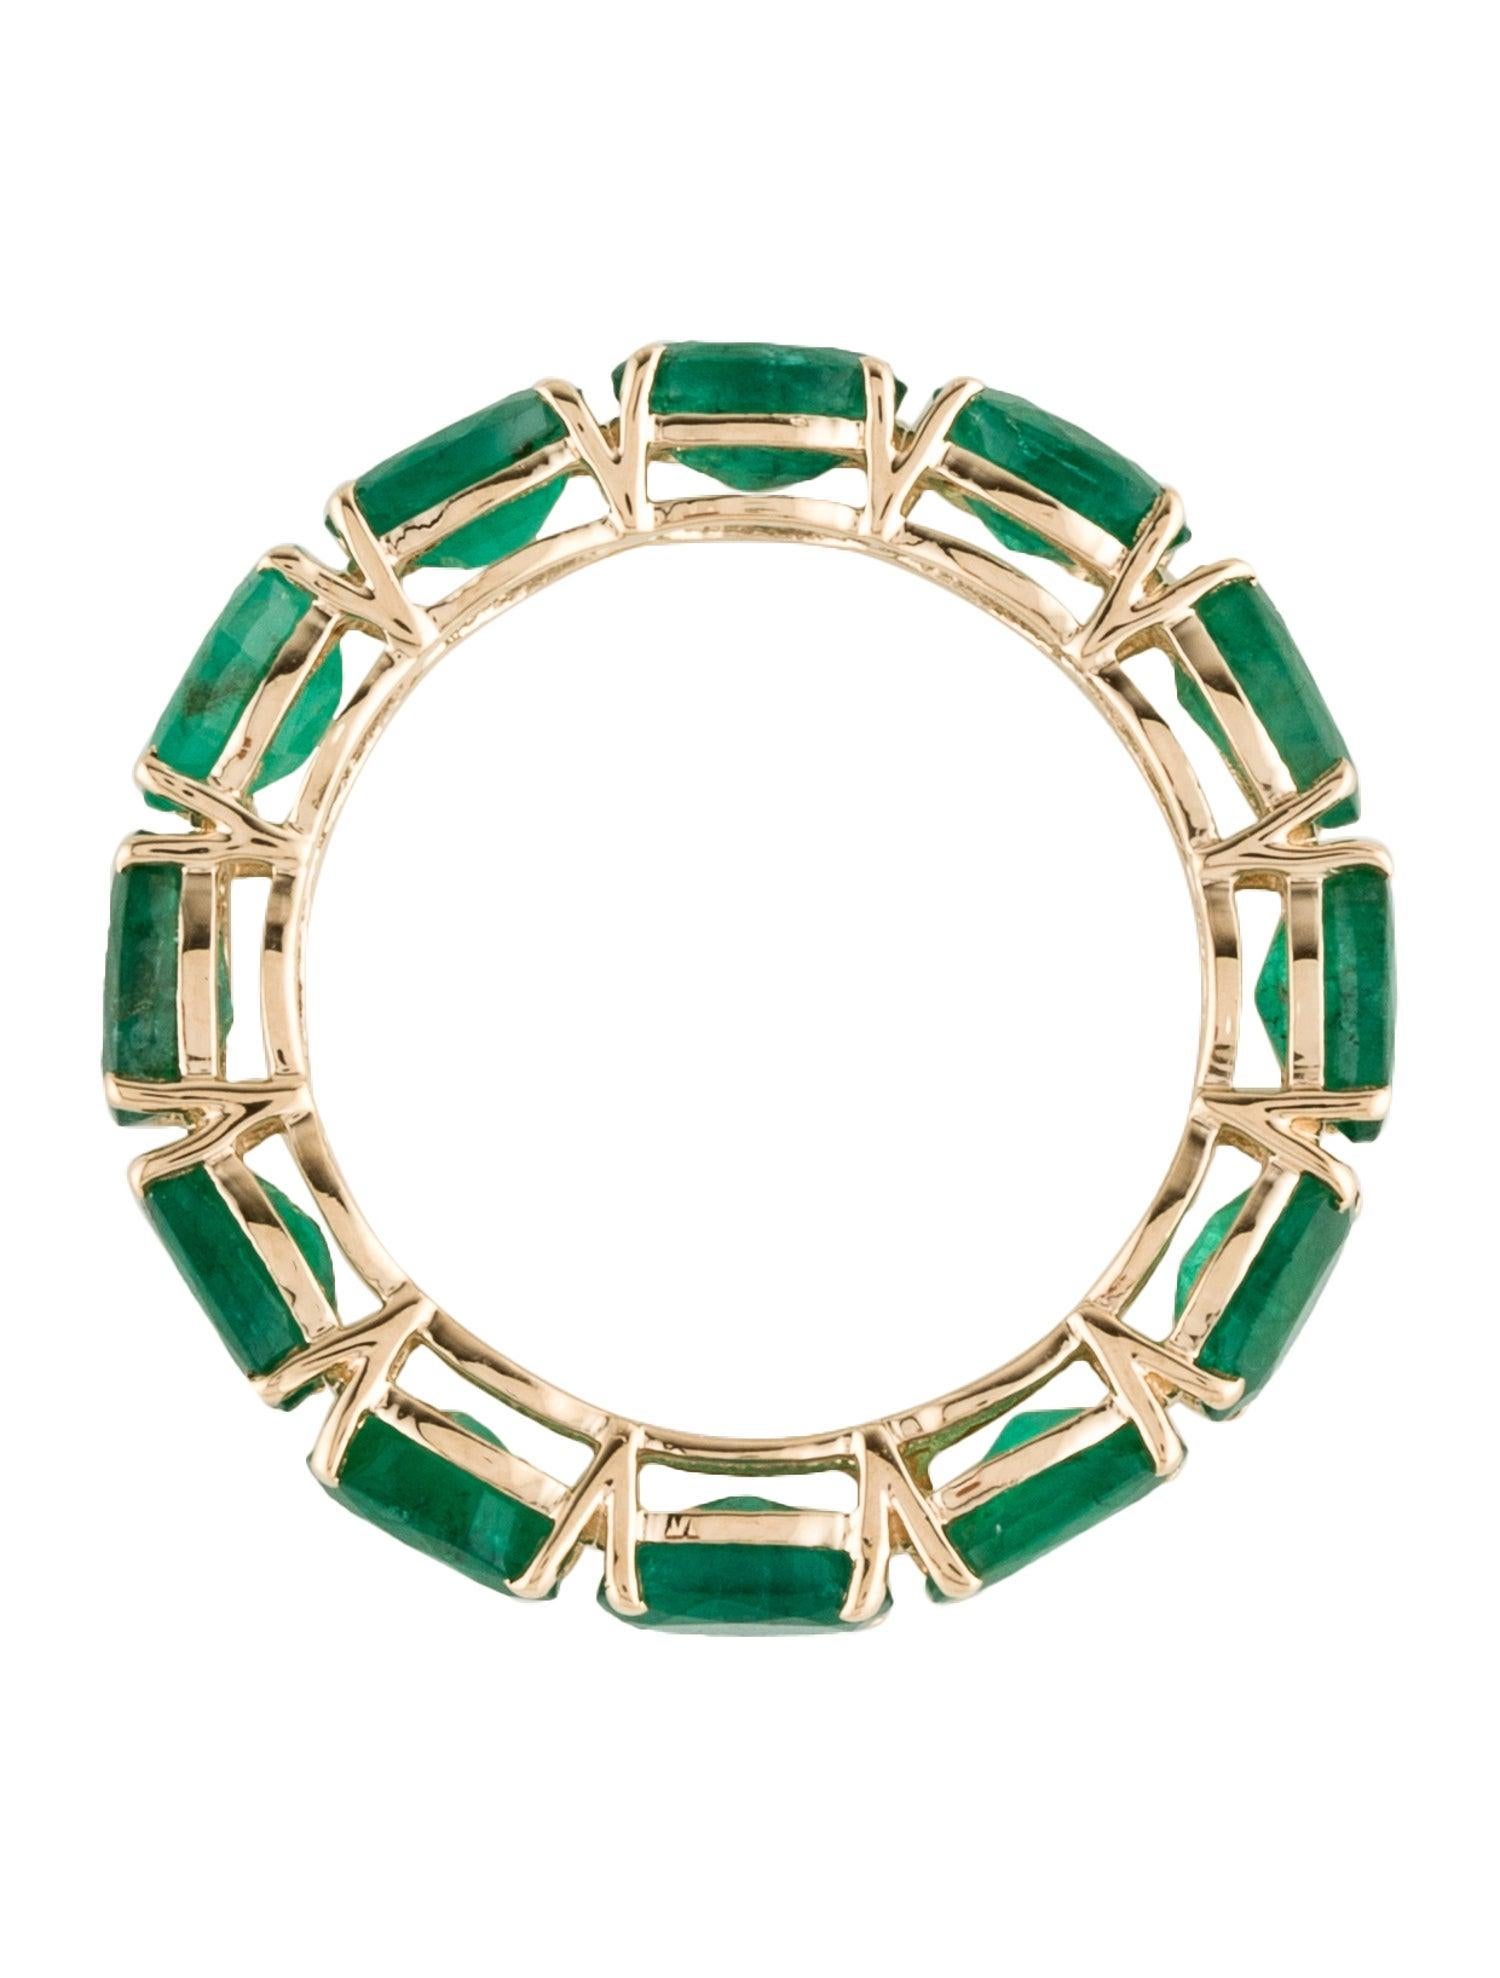 Exquisite 14K Gold 3.52ctw Emerald Eternity Band Ring - Size 8 - Luxury Jewelry In New Condition For Sale In Holtsville, NY